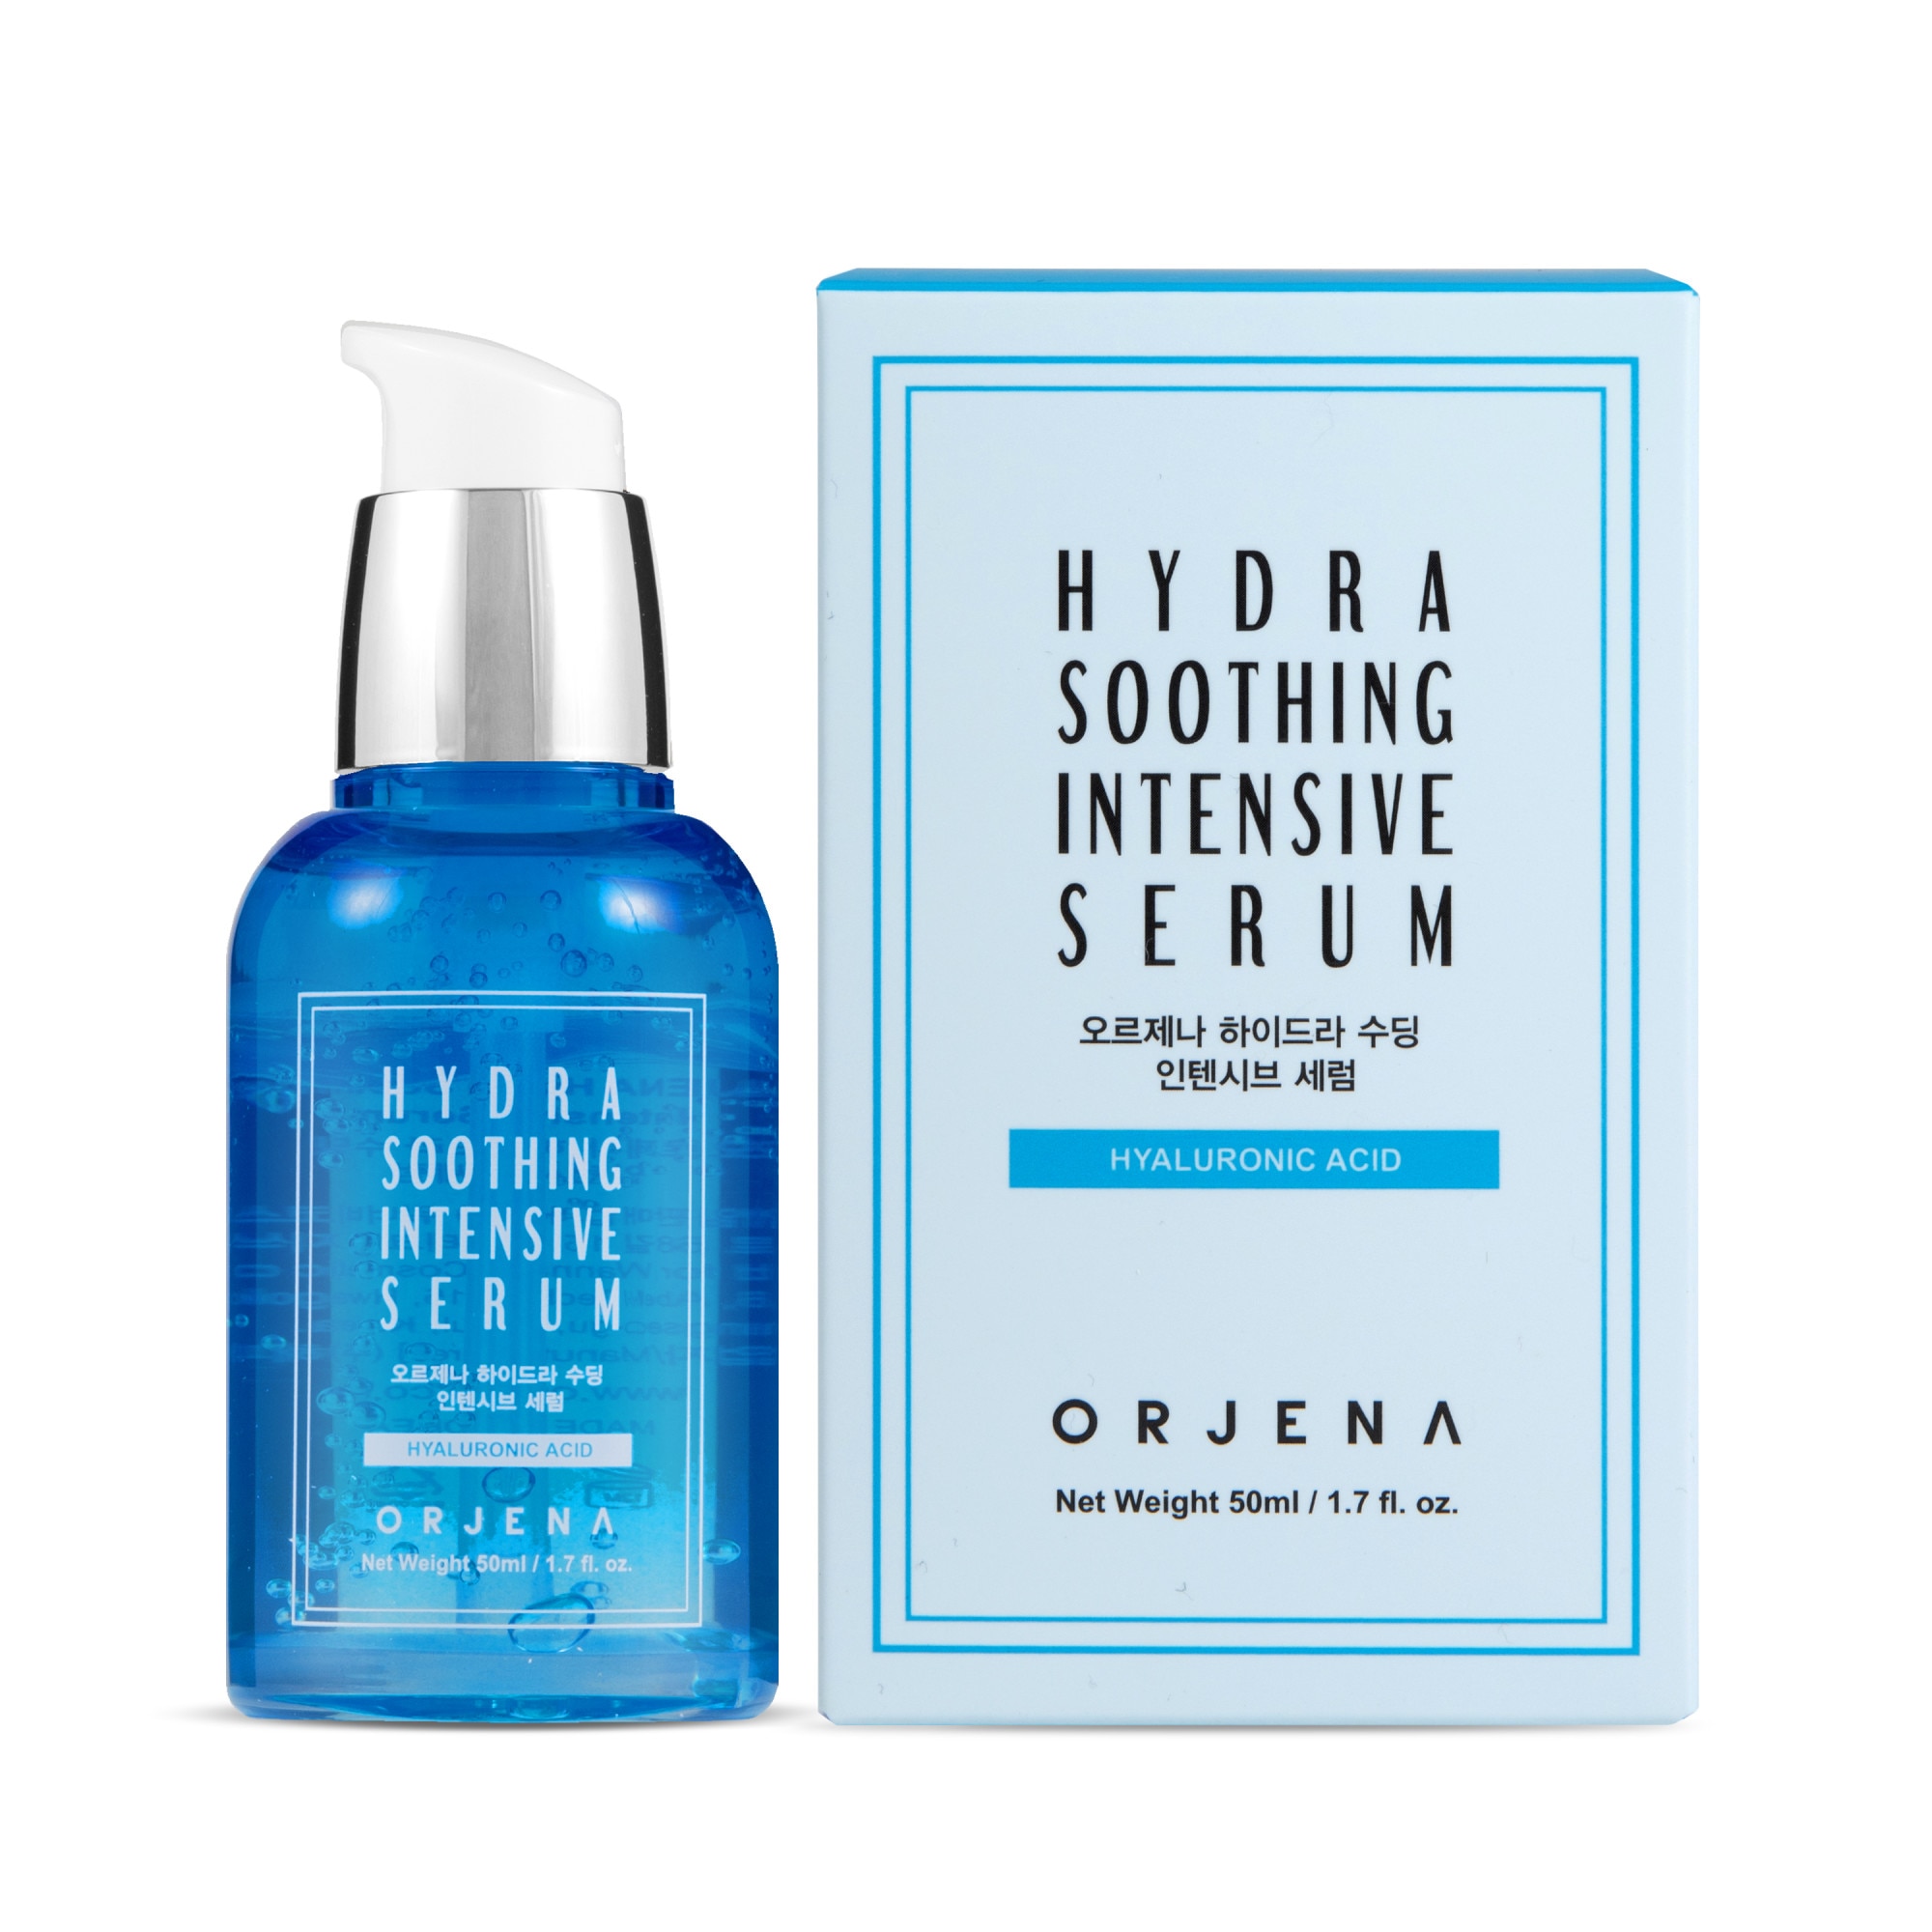 Hydra soothing intensive serum orjena tor browser iso hydra